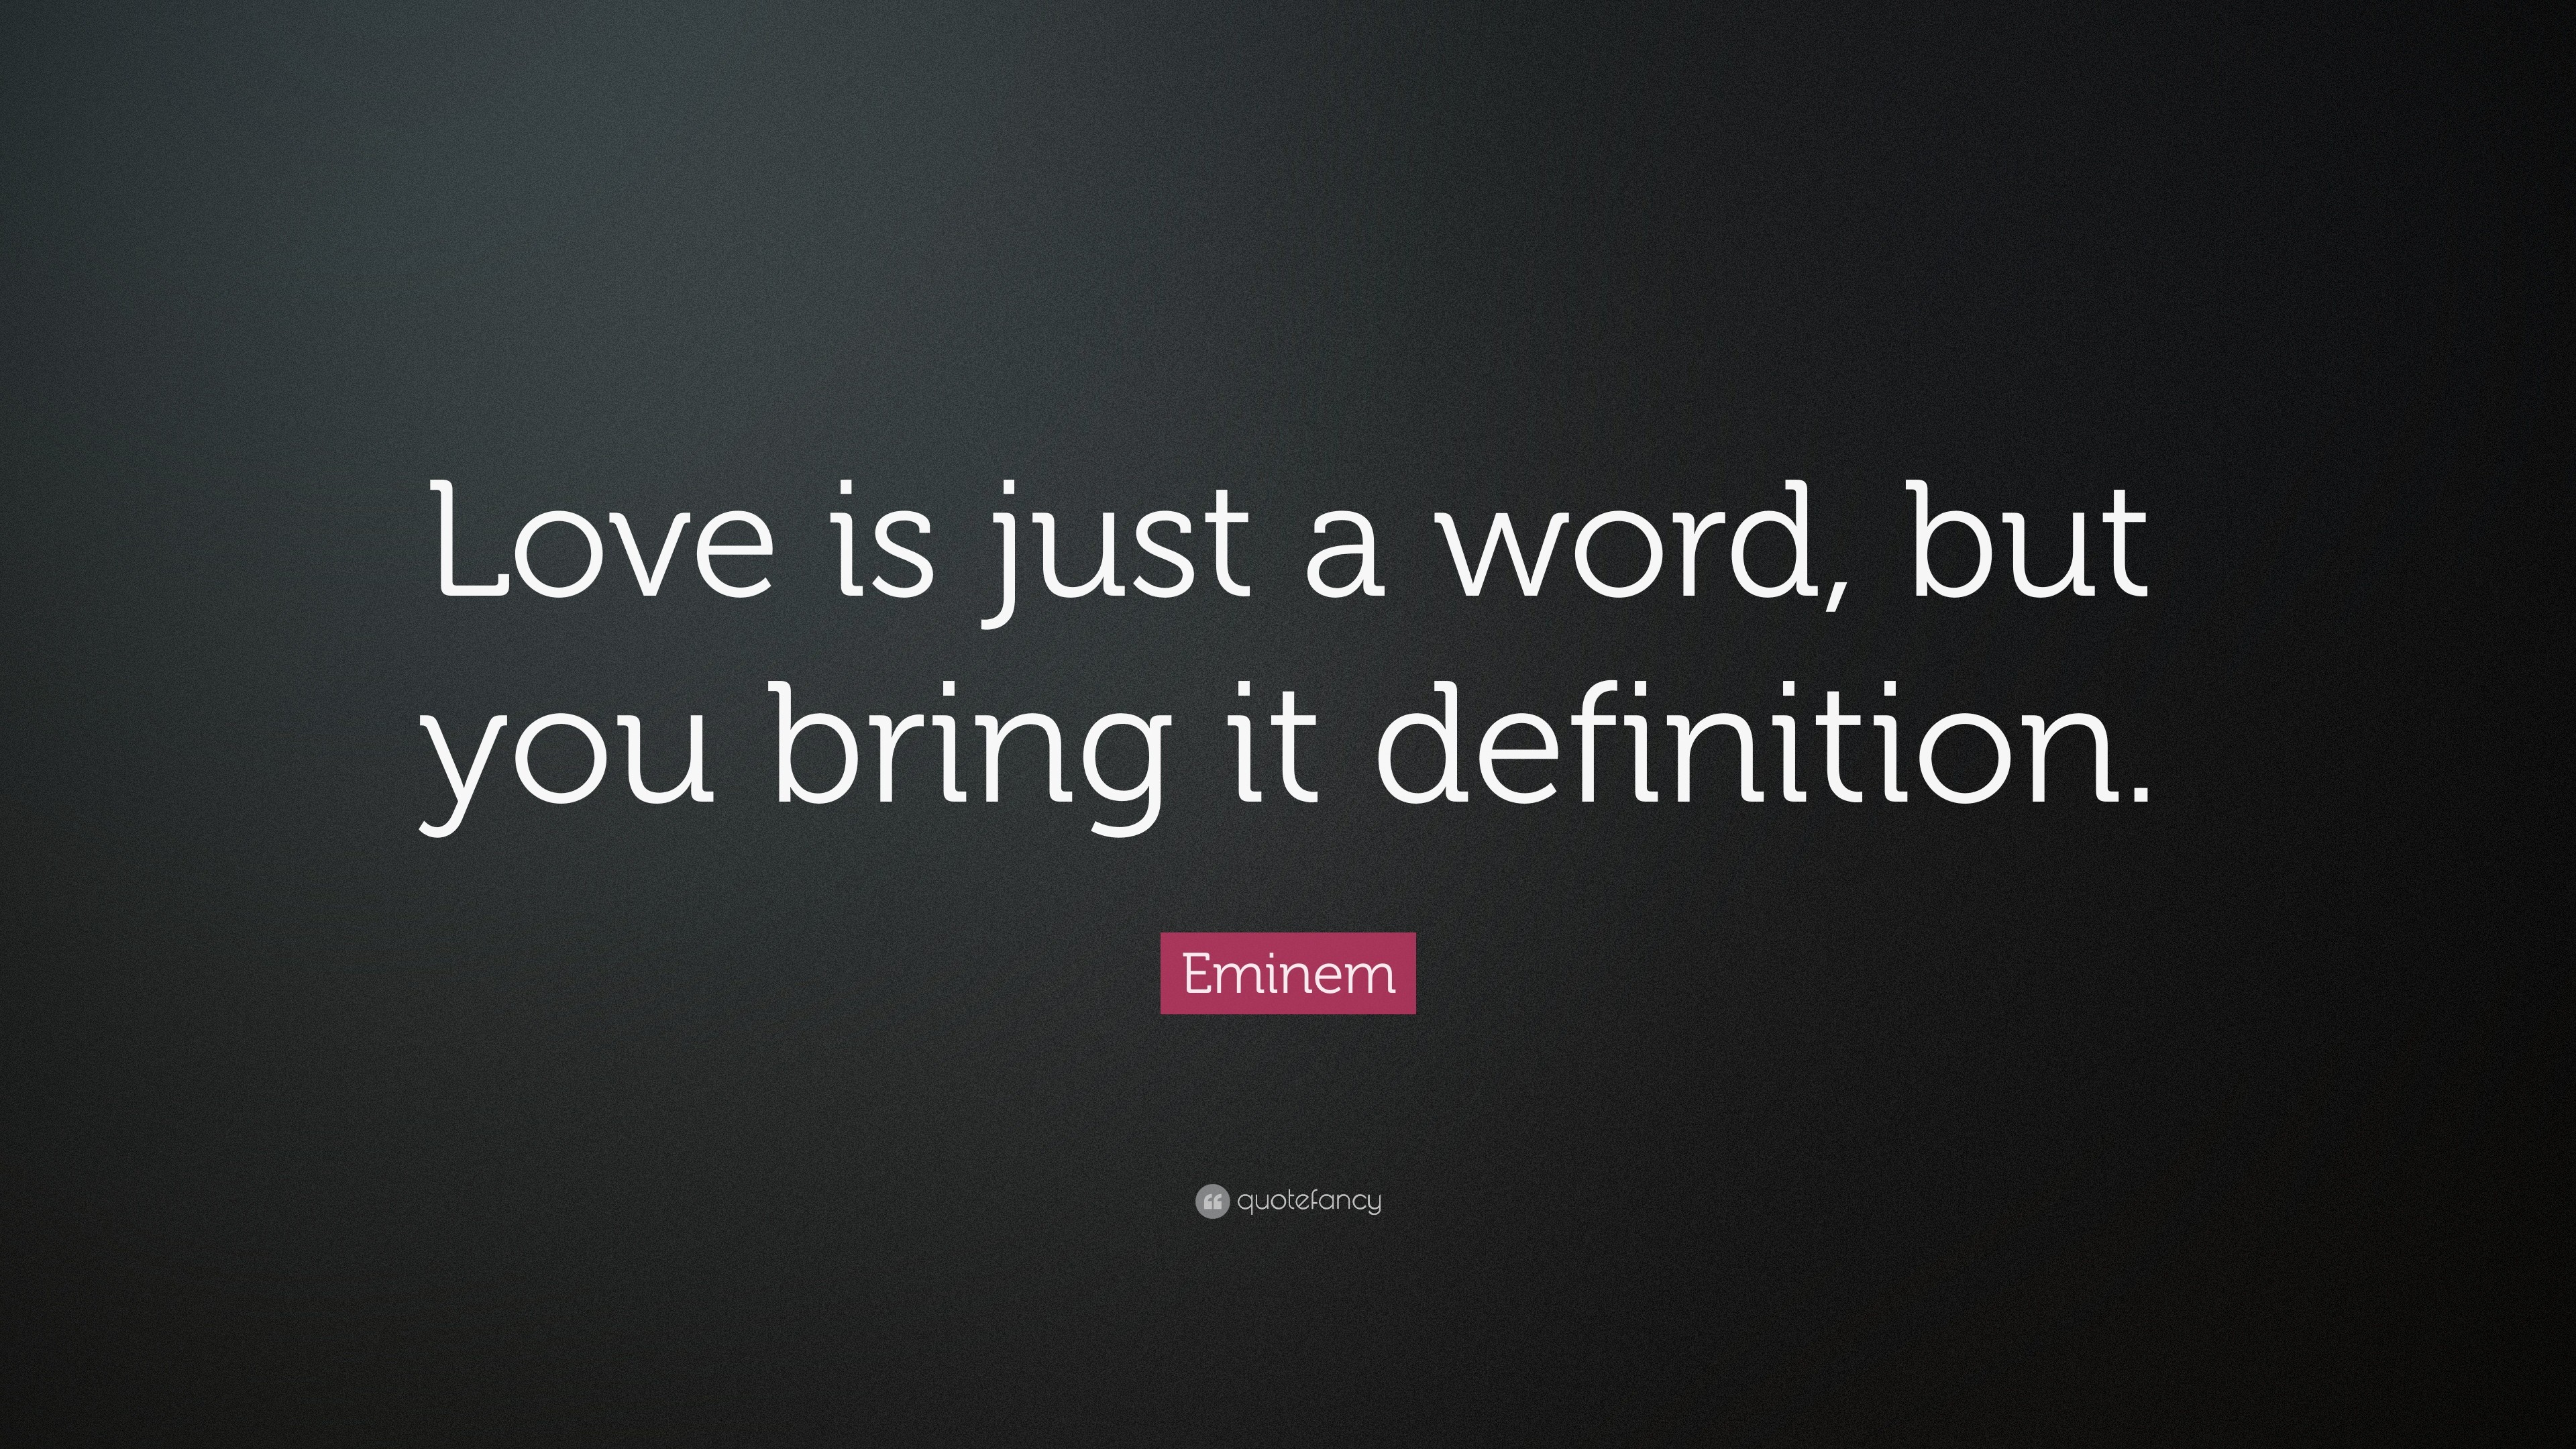 3840x2160 Eminem Quote: “Love is just a word, but you bring it definition.